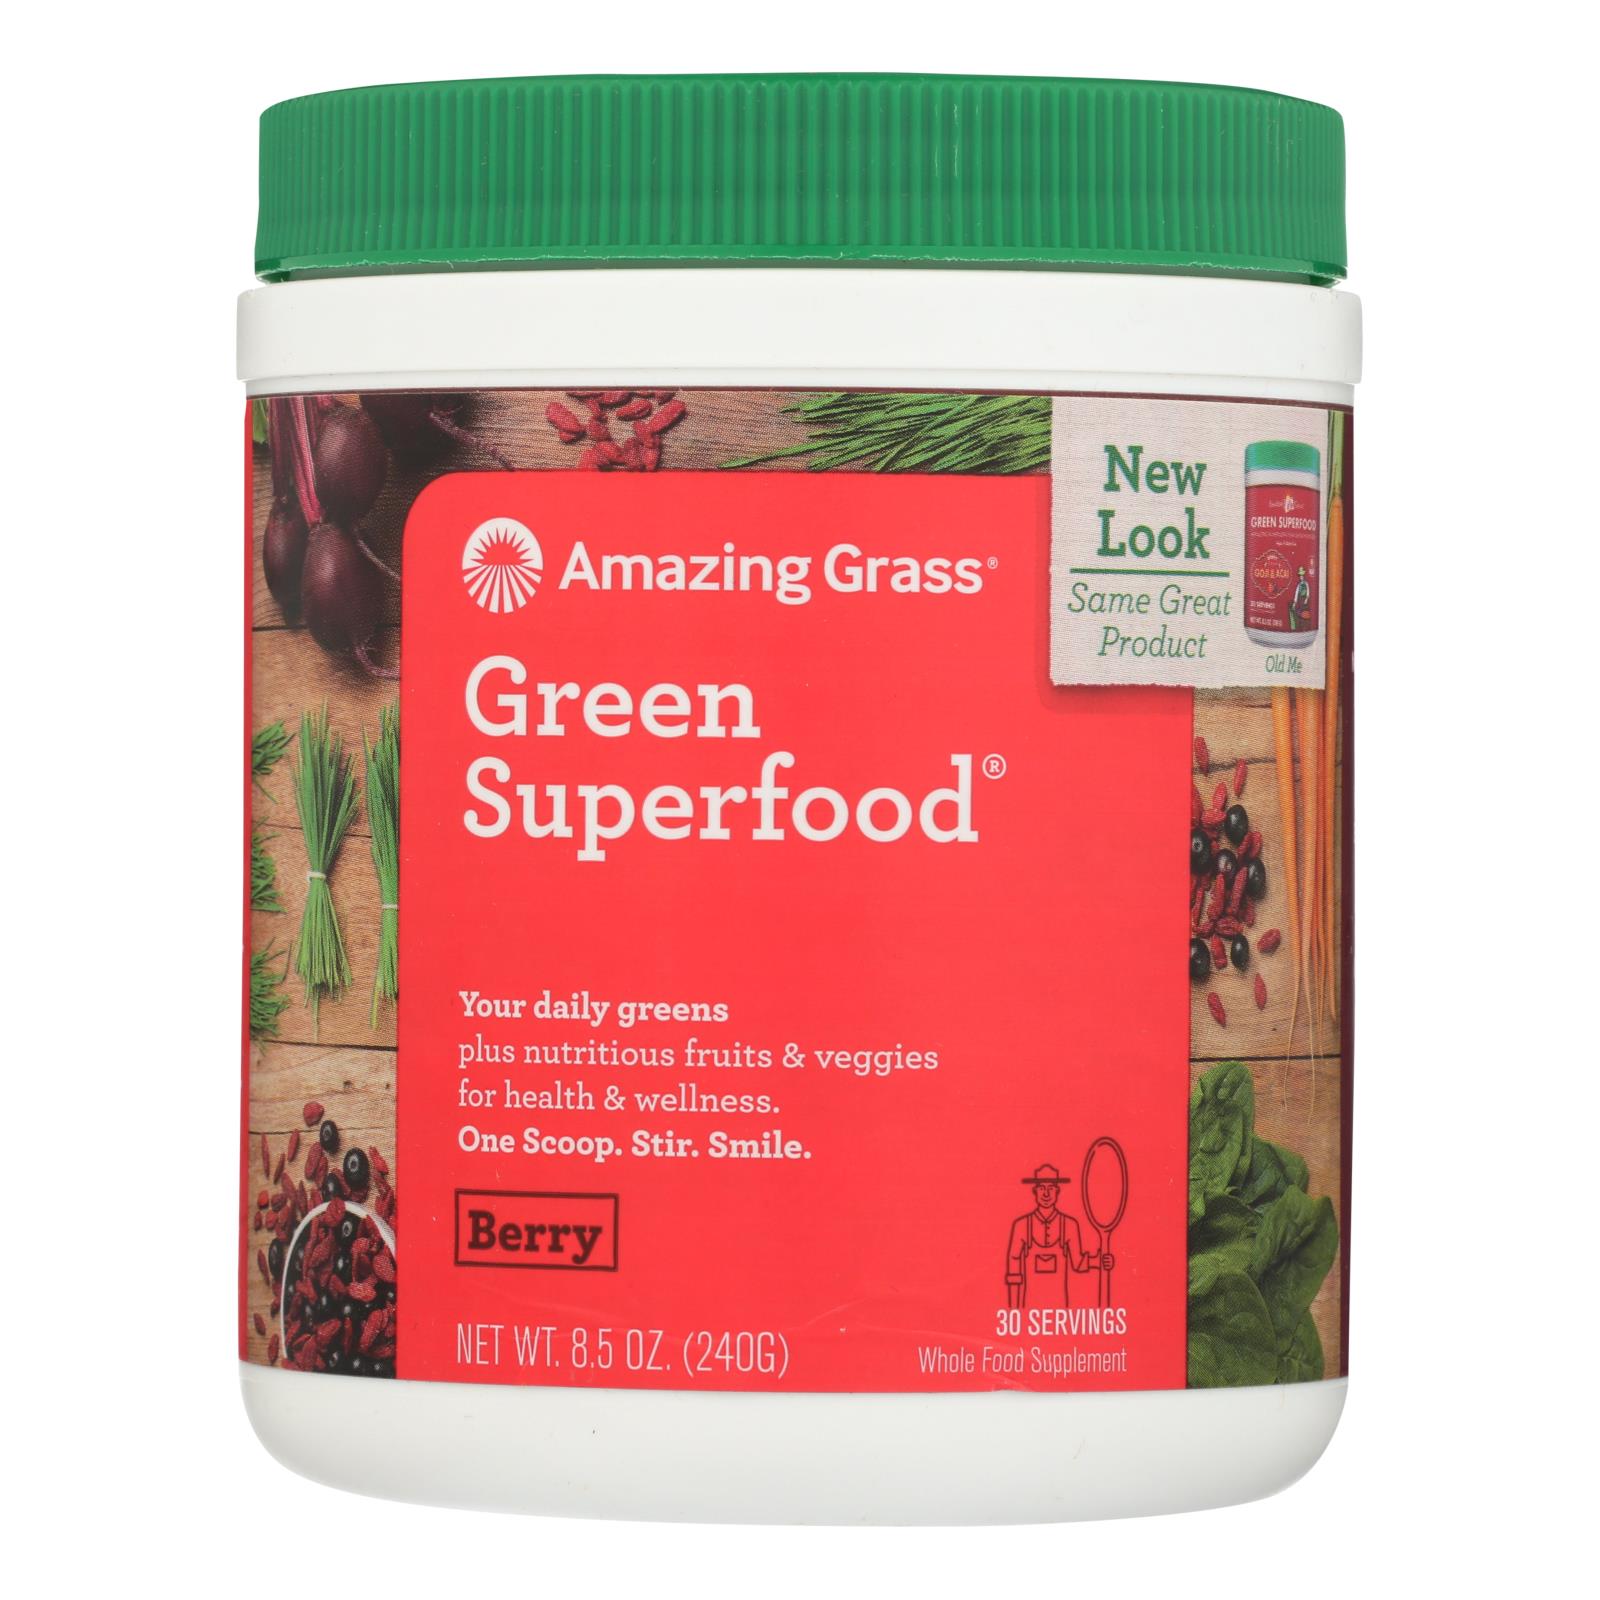 Amazing Grass Green Superfood - Berry - 30 Servings - 8.5 oz.